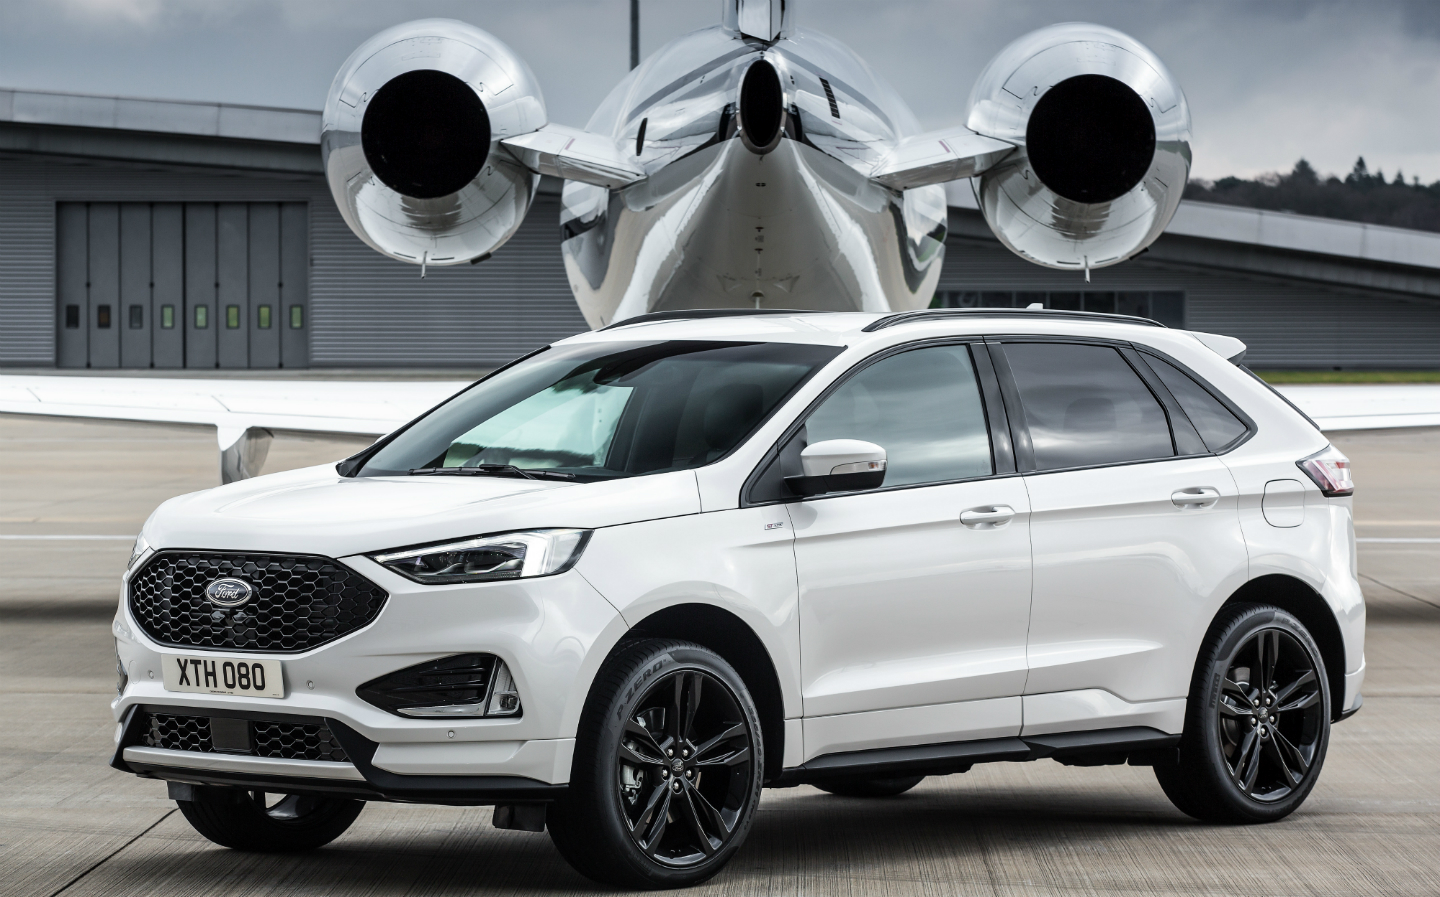 https://www.driving.co.uk/wp-content/uploads/sites/5/2018/12/2018-Ford-Edge-review-02.jpg